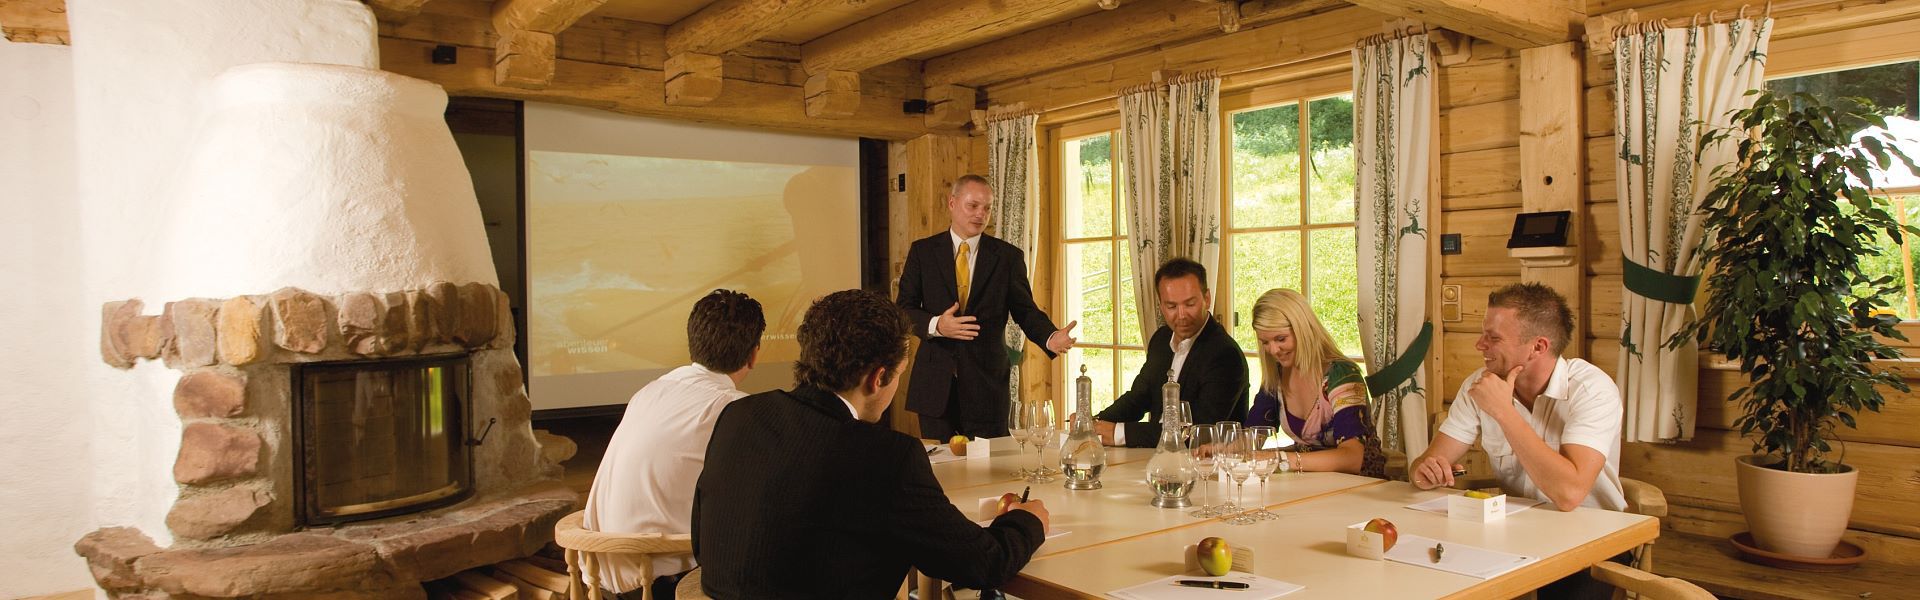 <strong>Incentive event</strong><br><br>For talks and indoor events, there are seminar rooms of various different sizes available, while the amazing sports and wellness facilities offer plenty in the way of action and relaxation...